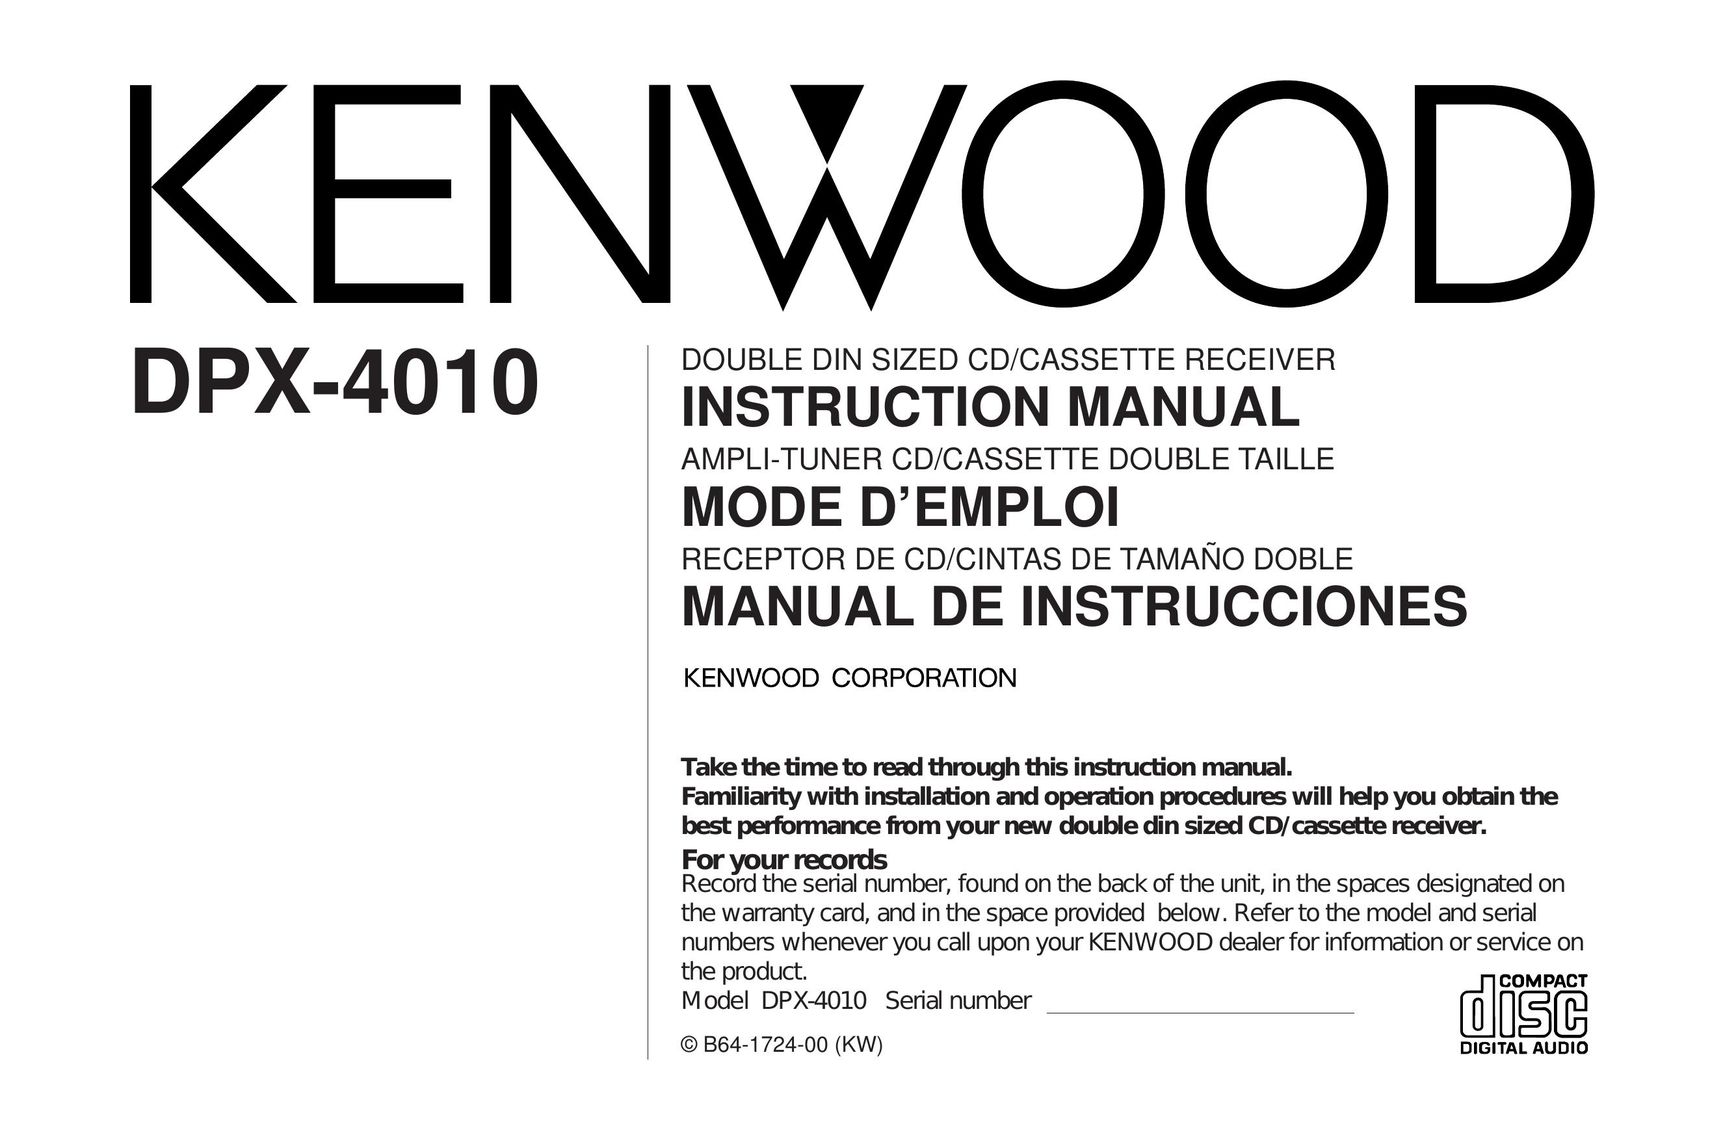 Kenwood DPX-4010 Car Stereo System User Manual